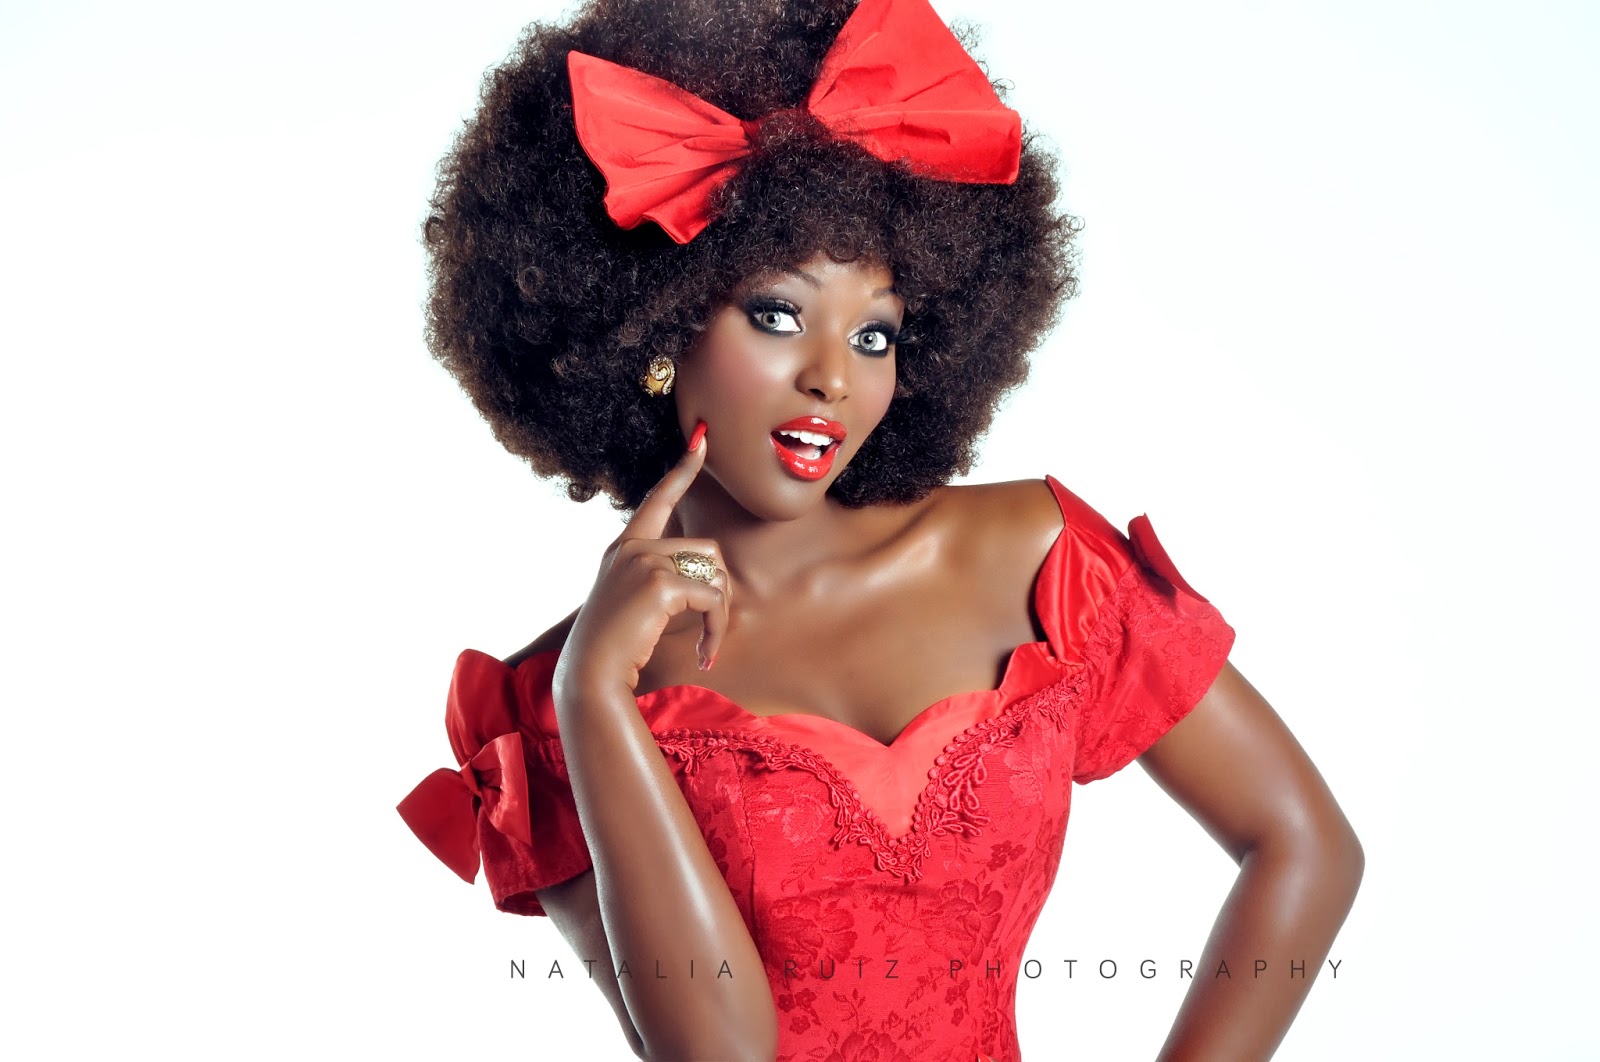 People 1600x1062 Amara La Negra singer Dominican Republic Latinas ebony women Afro red nails celebrity black women brunette curly hair red lipstick open mouth hair bows red dress white background portrait studio